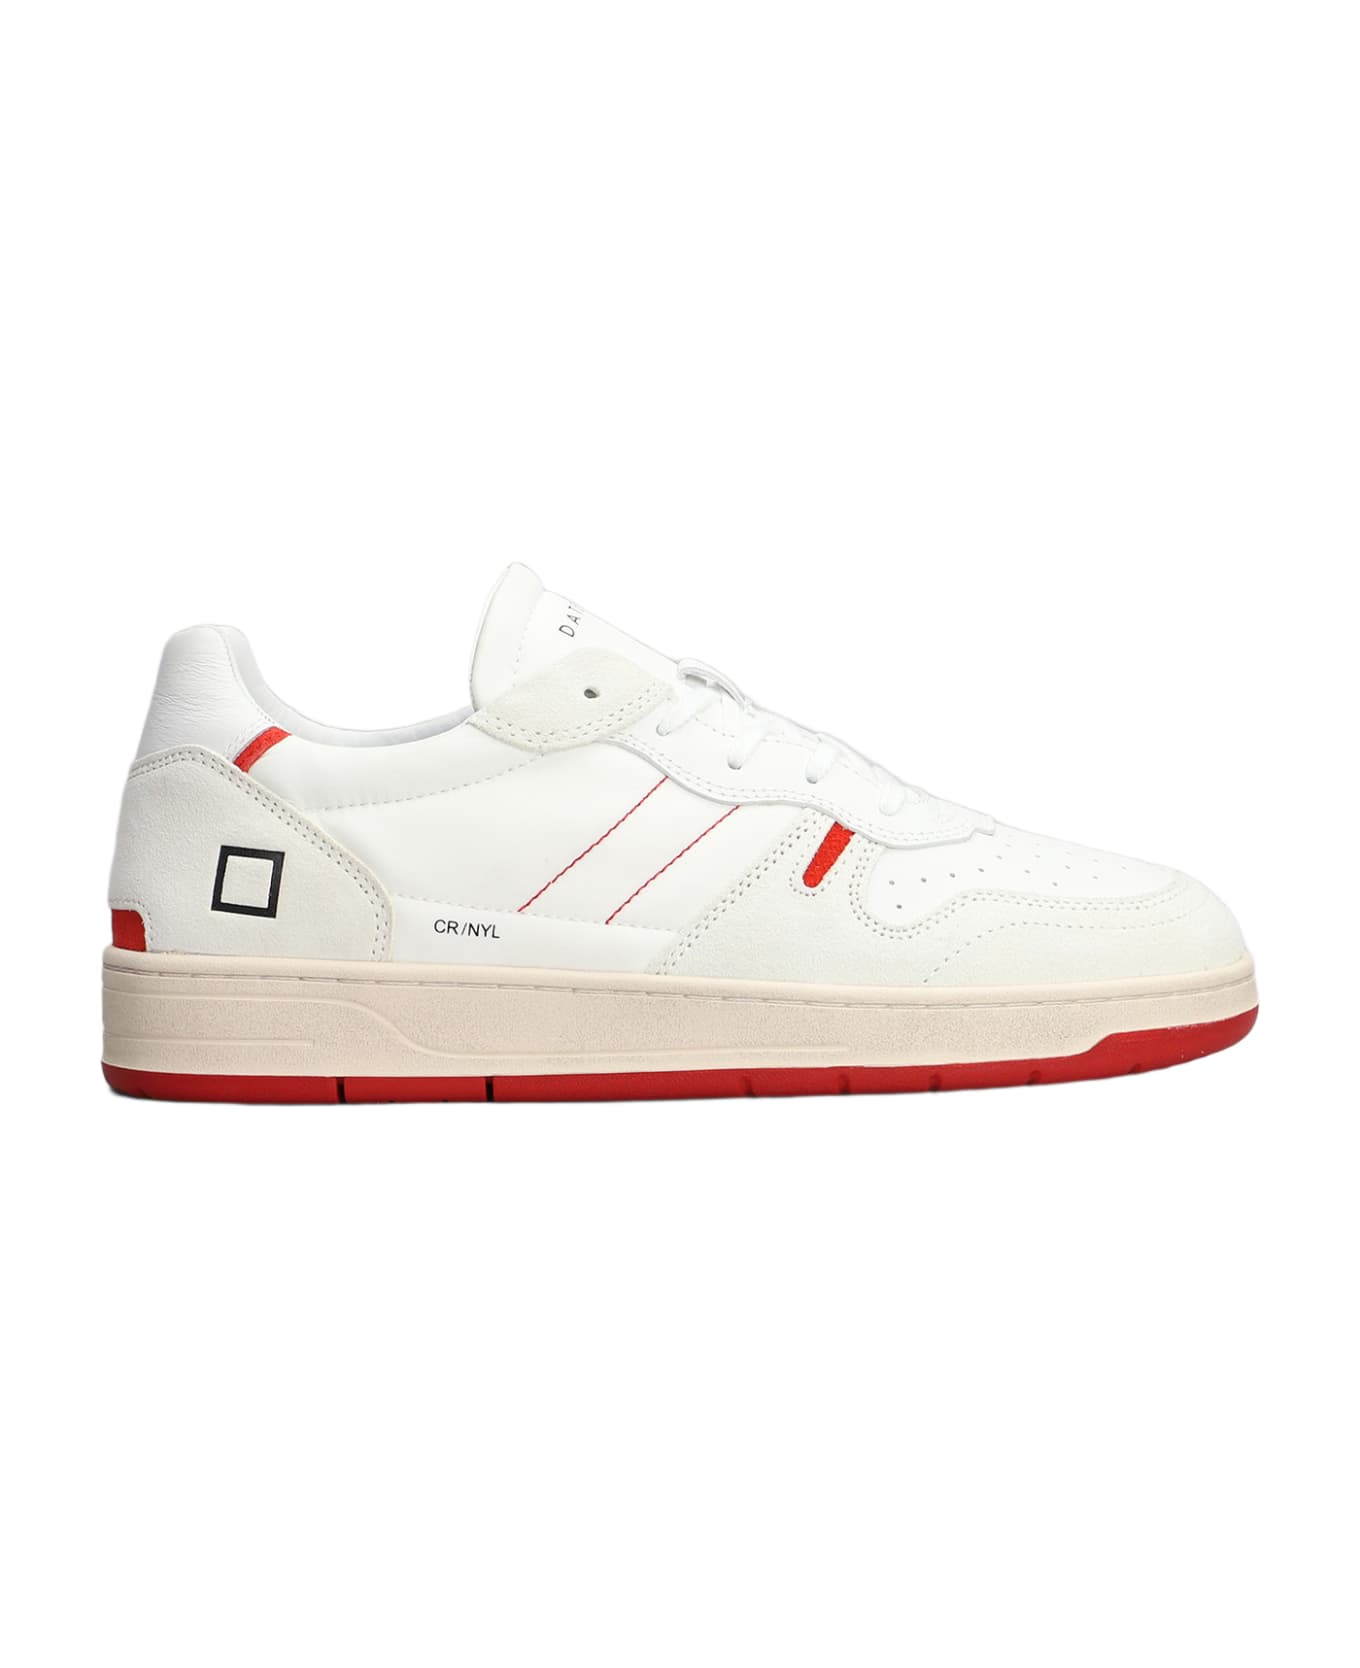 D.A.T.E. Court 2.0 Sneakers In White Leather And Fabric - white スニーカー